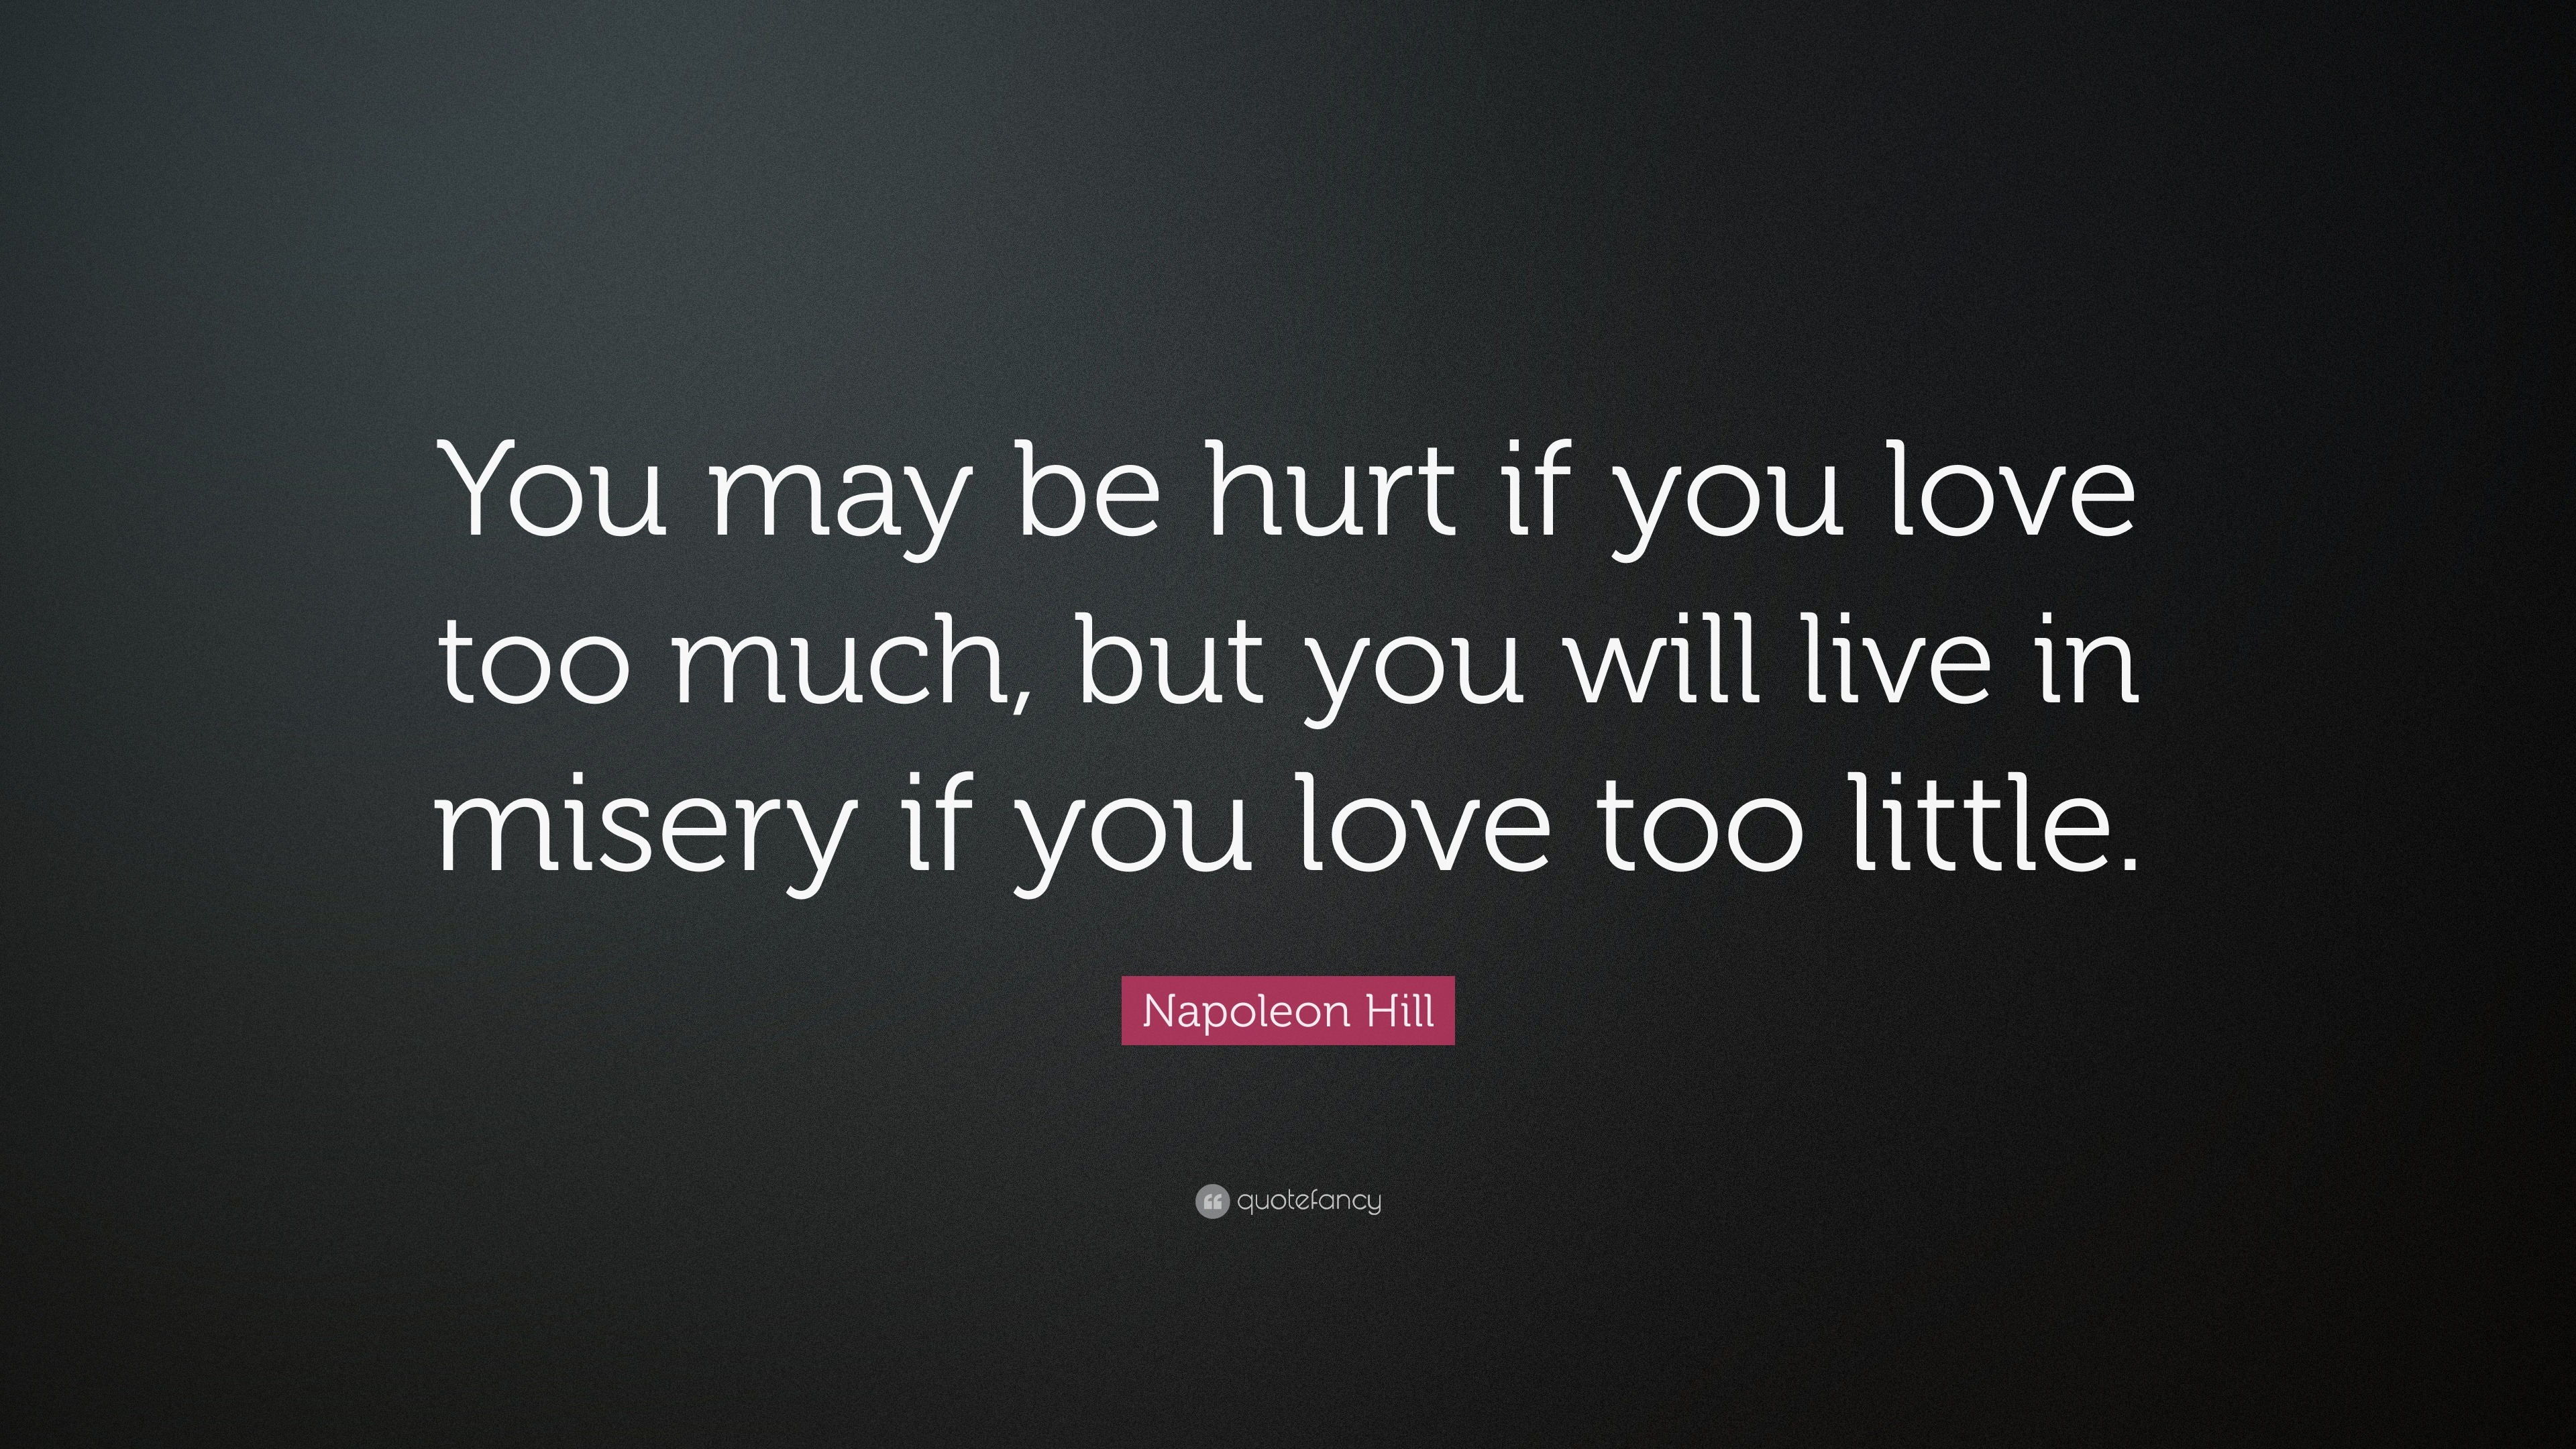 Napoleon Hill Quote “You may be hurt if you love too much but